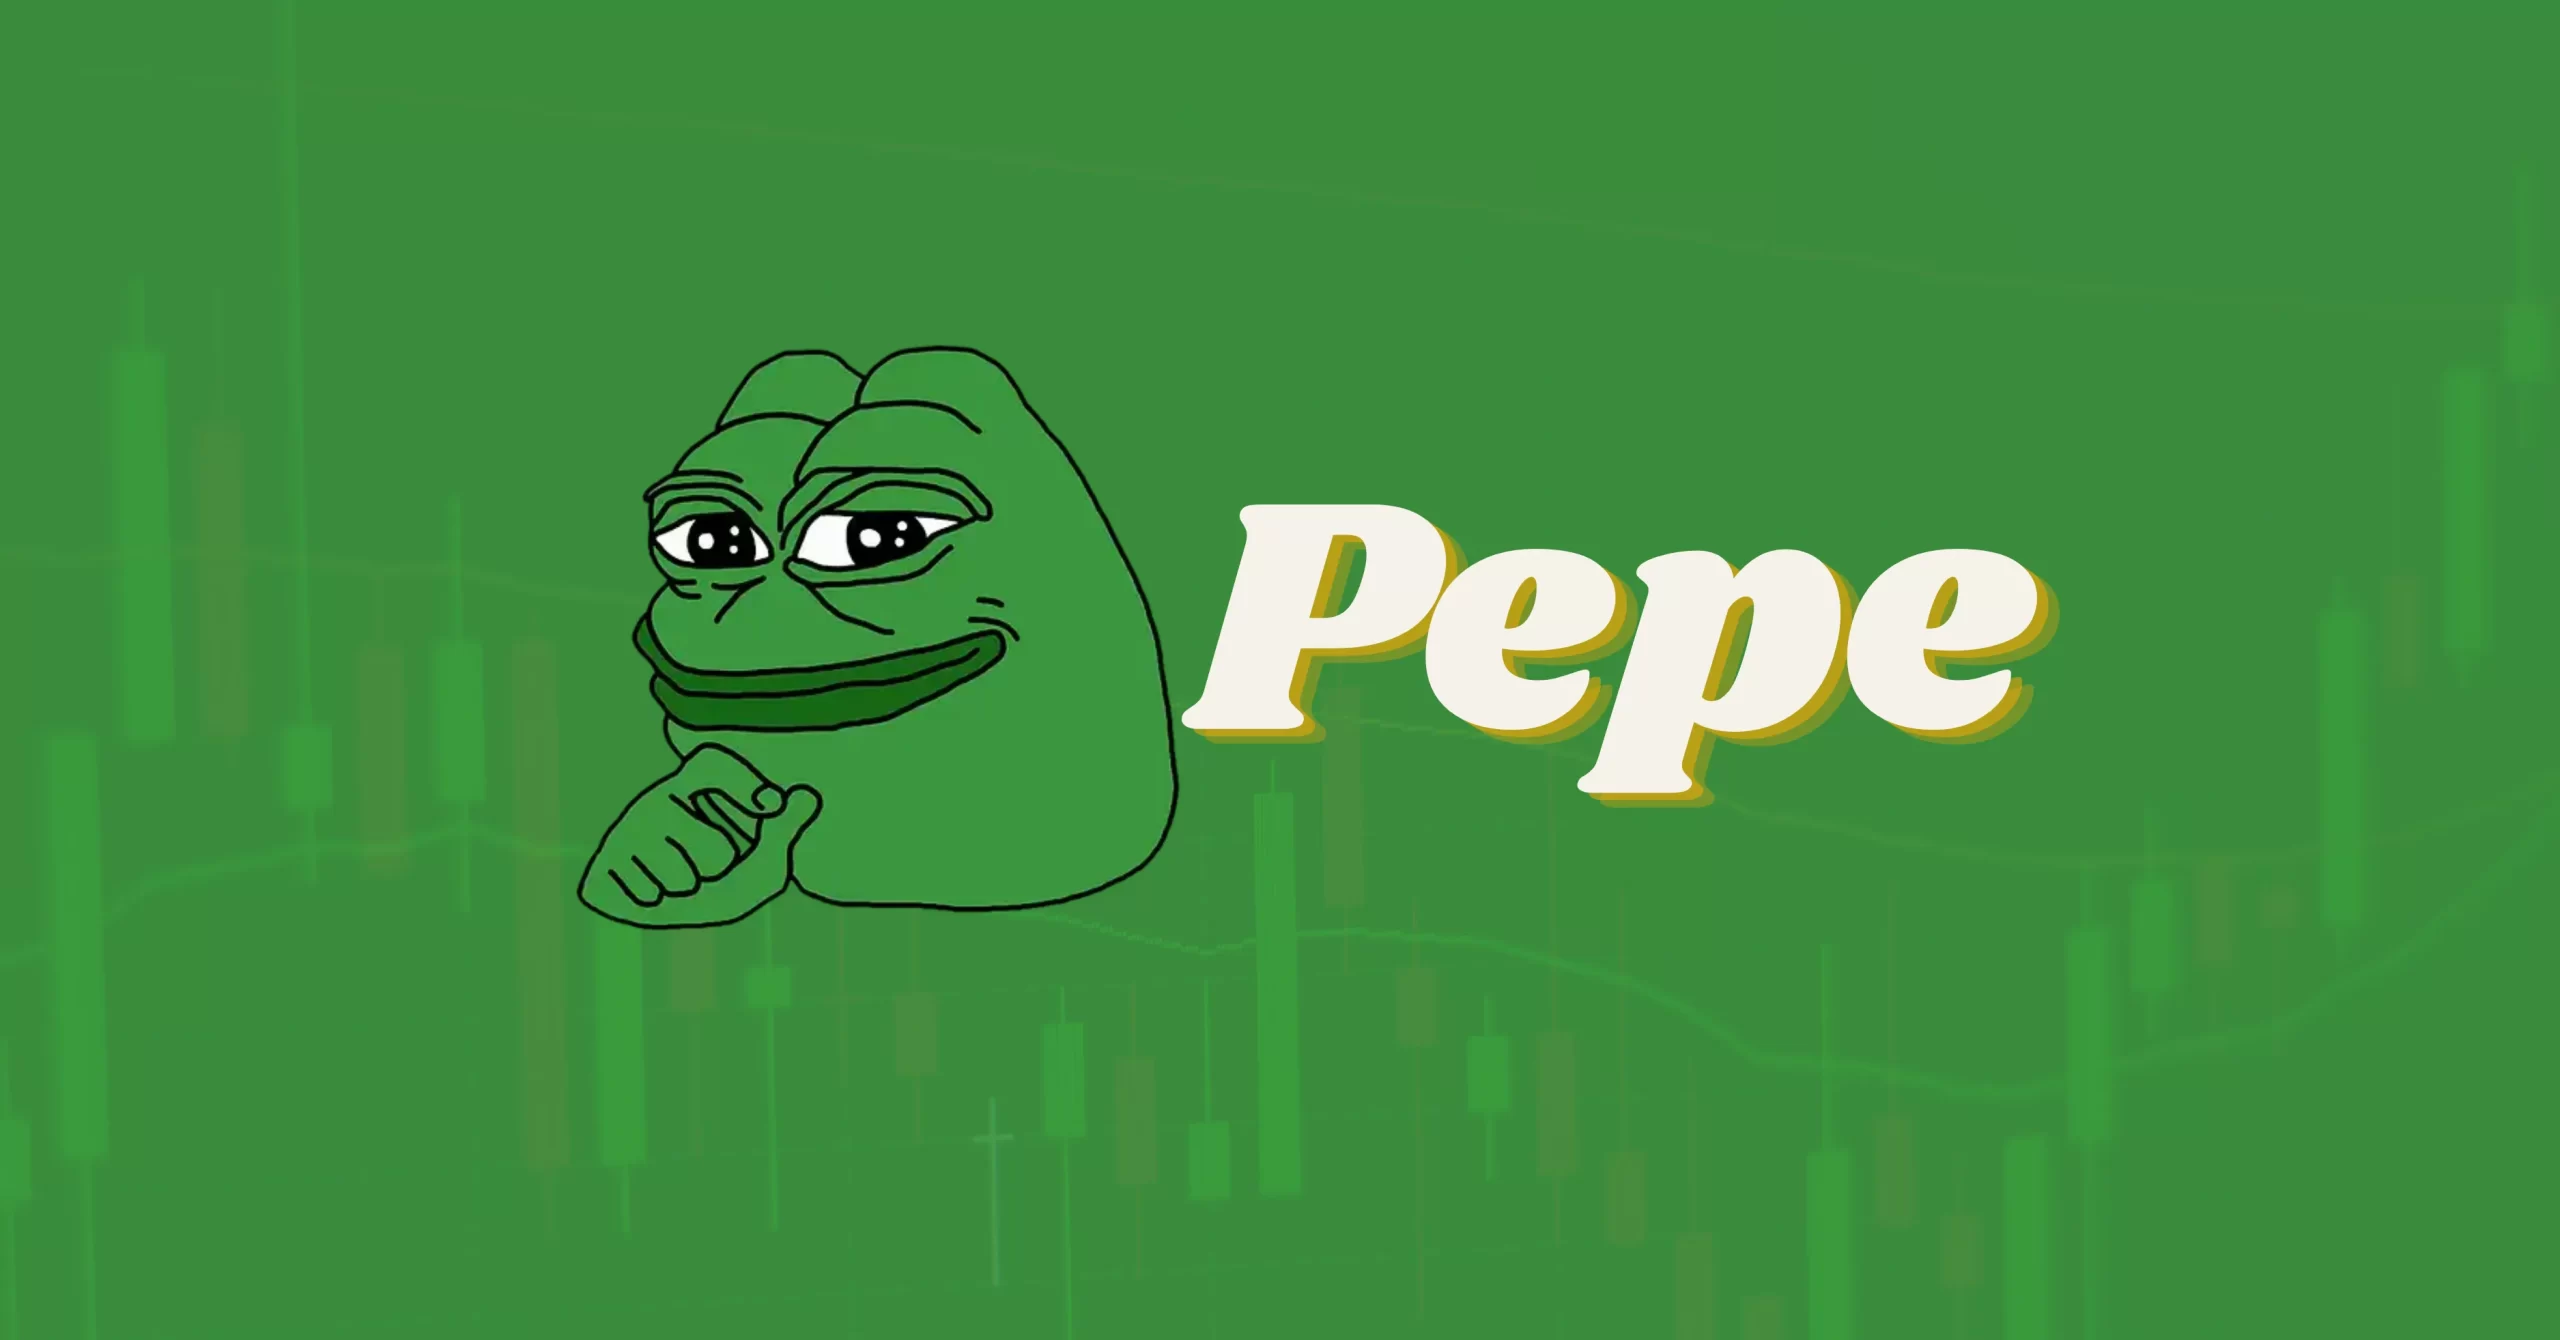 Traders excitement led to additional cryptocurrency markets listing PEPE